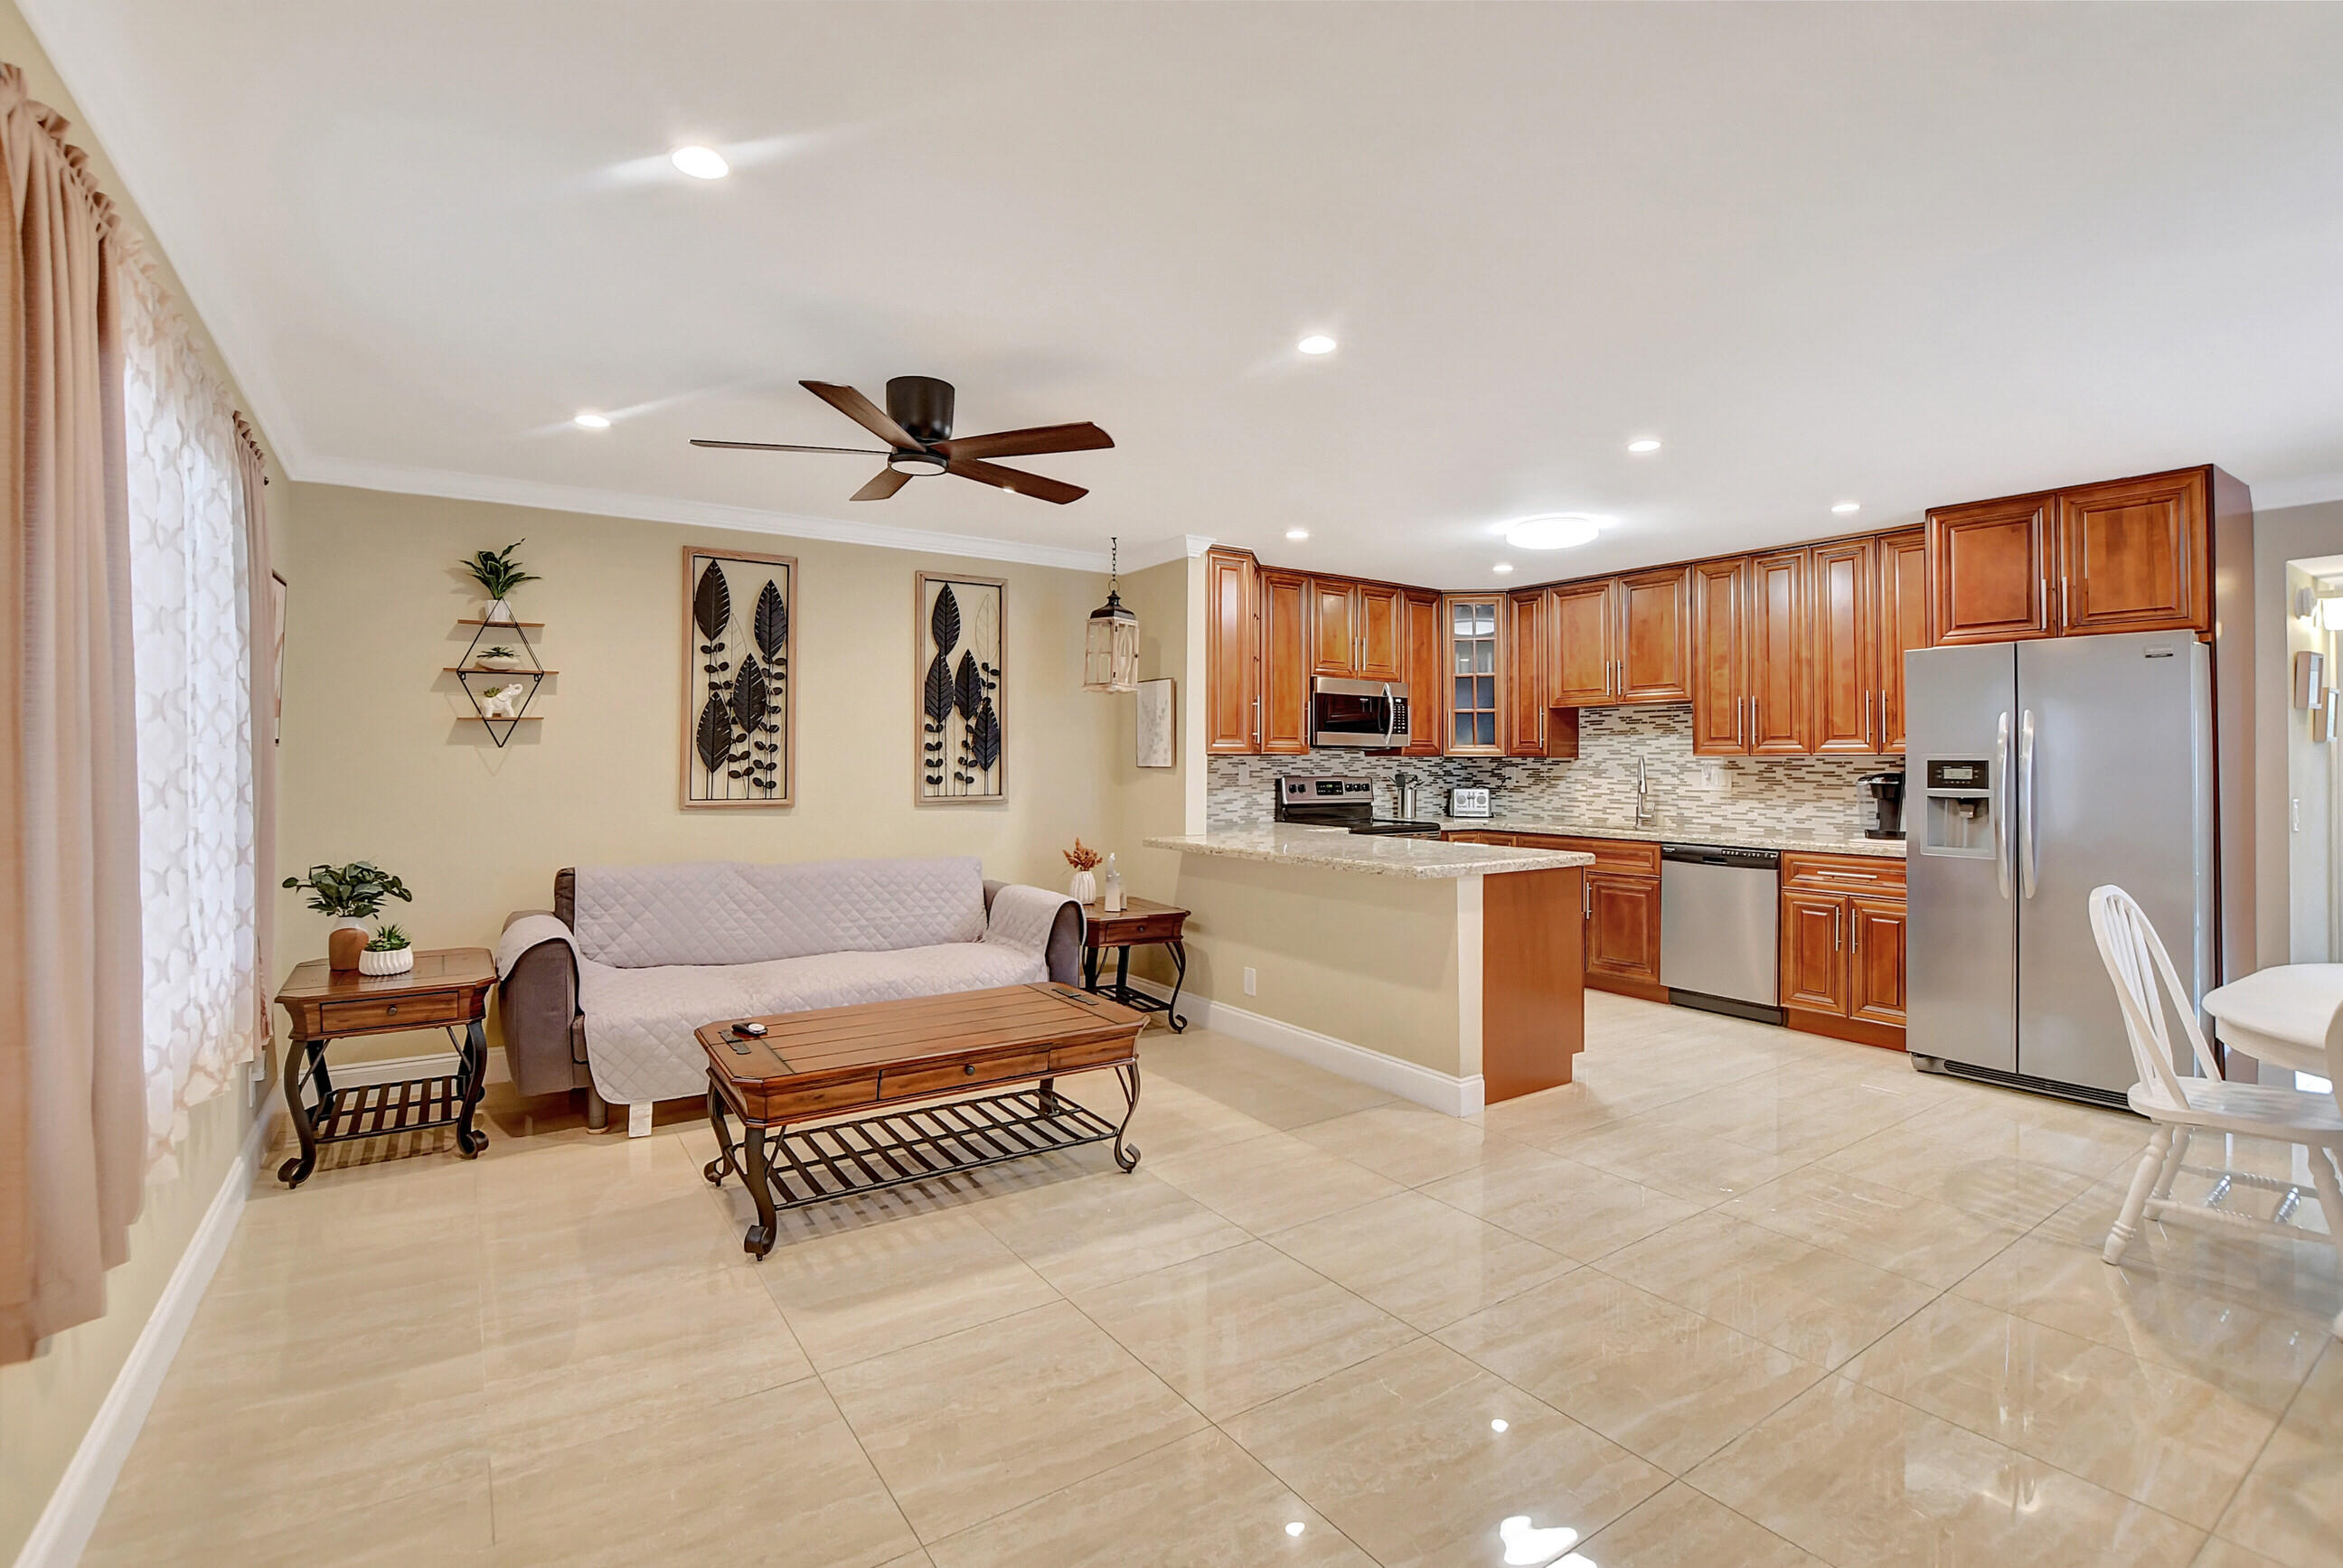 a large living room with stainless steel appliances kitchen island granite countertop furniture and a couch